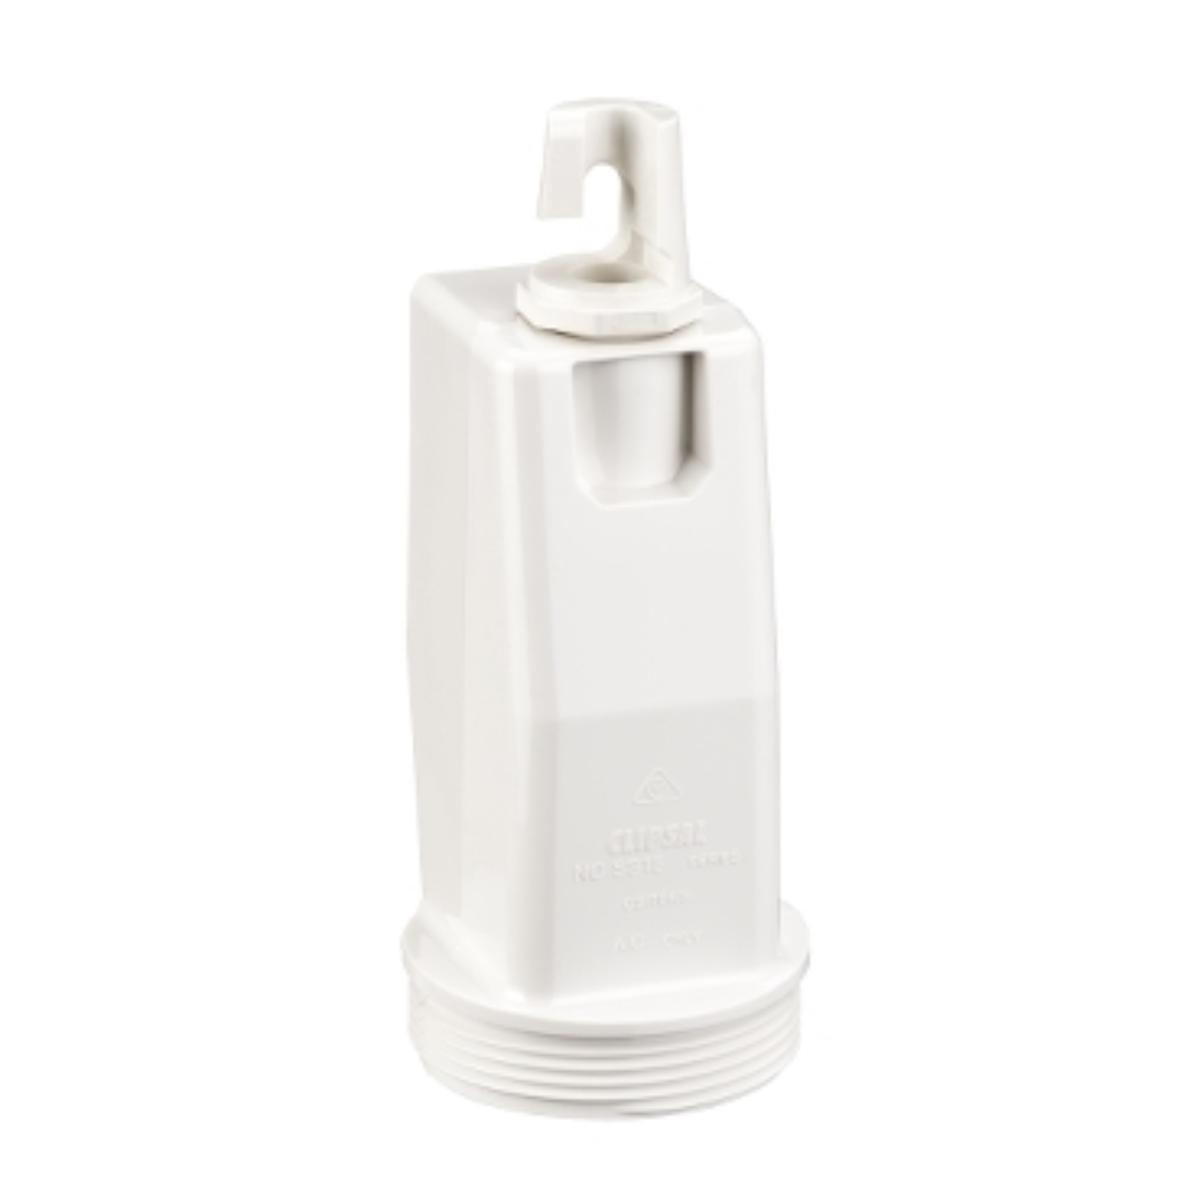 SWITCHED PENDANT OUTLET 10A 250V WHITE